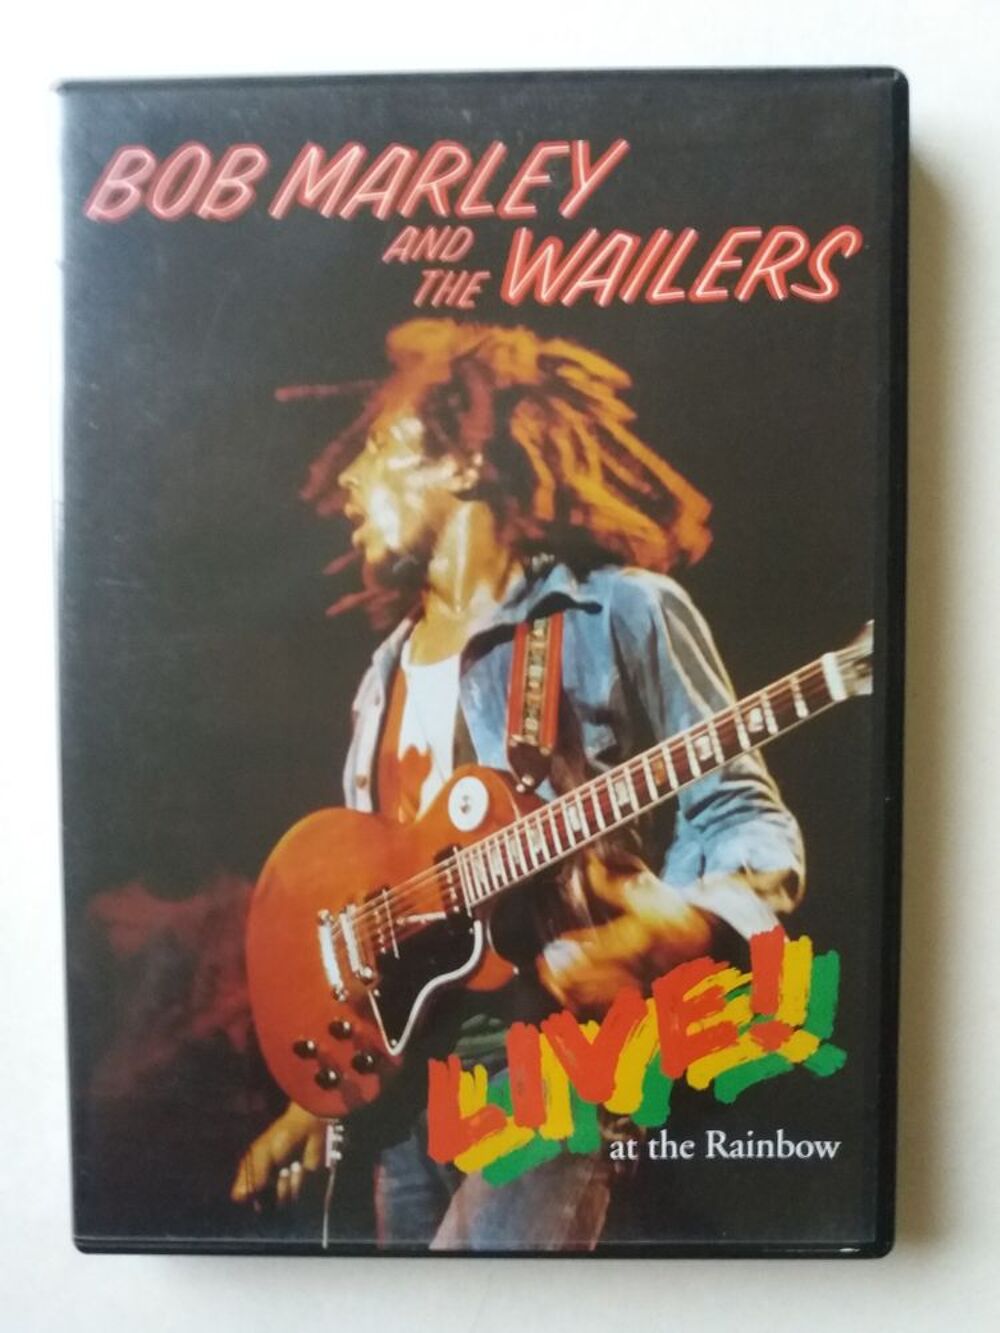 DVD Bob Marley and the Wailers DVD et blu-ray